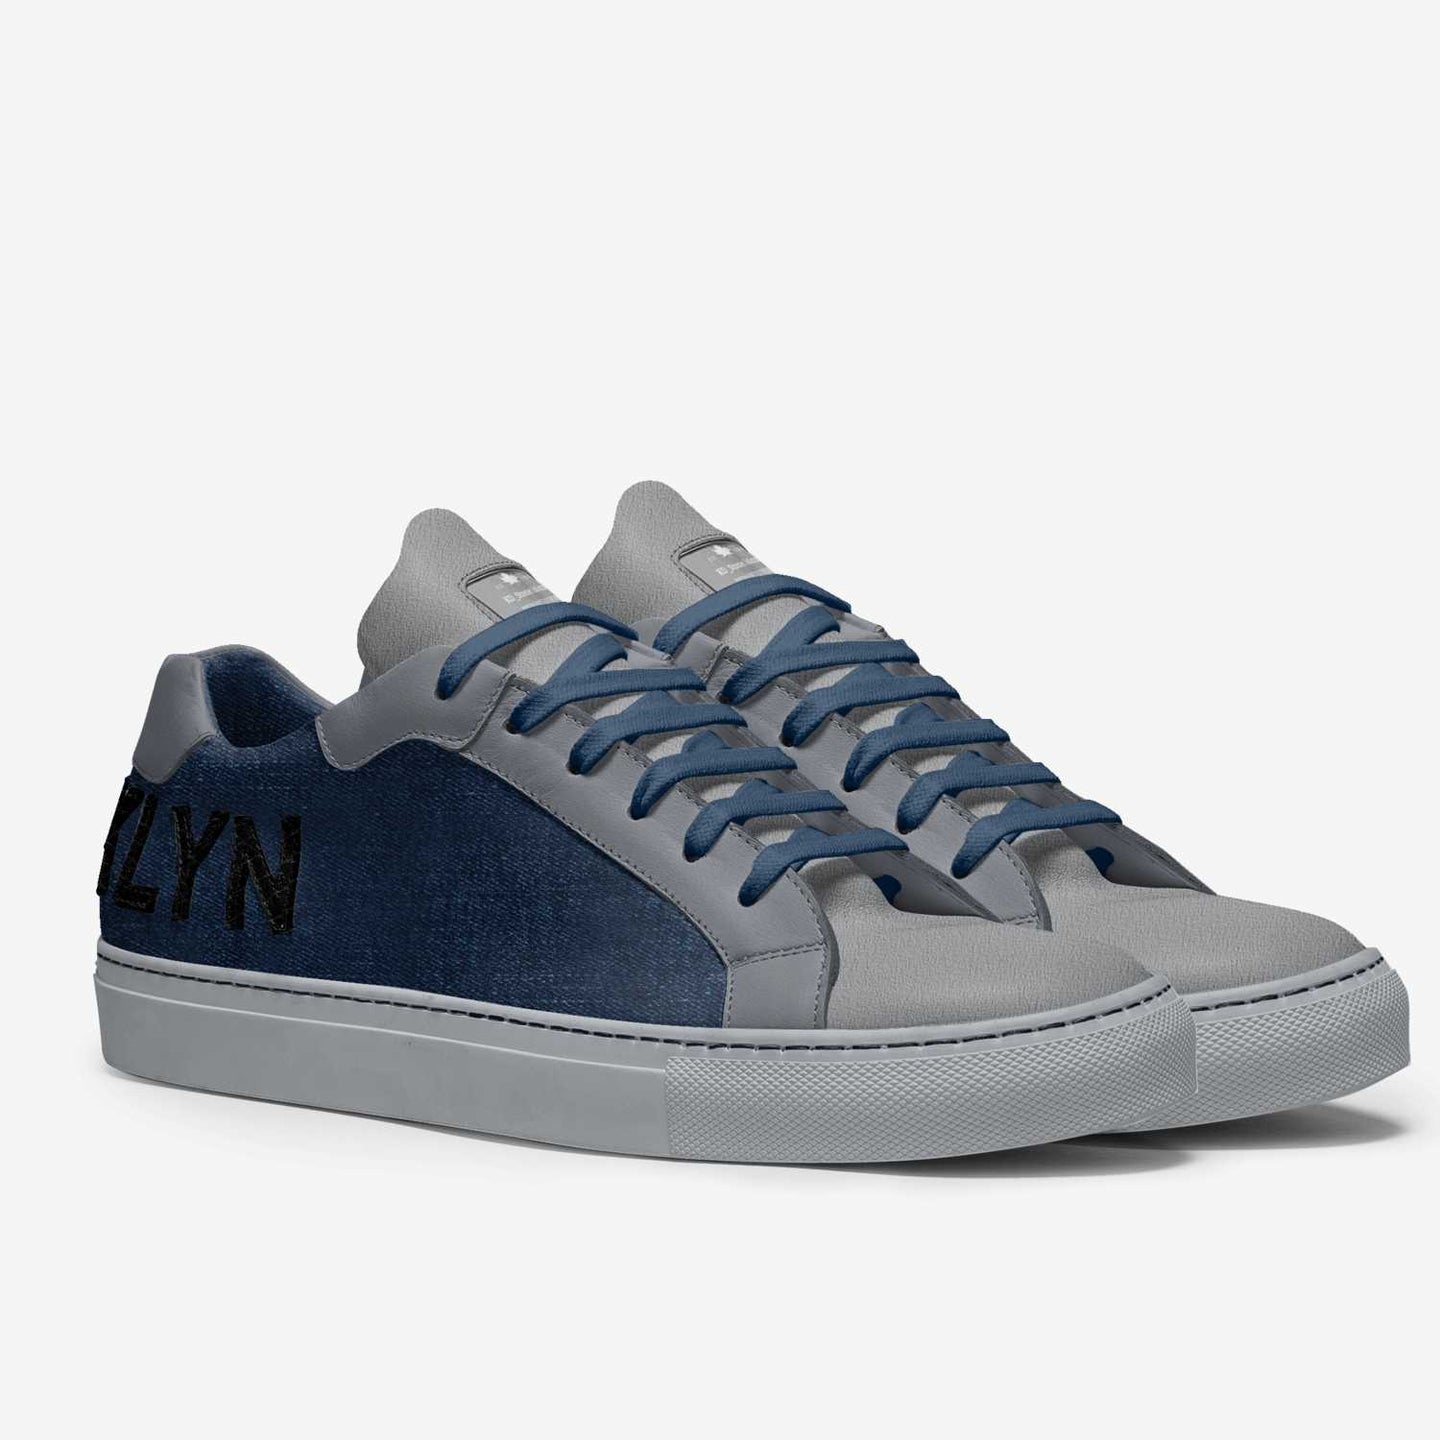 KD_STONE ISLAND blue & gray Contemporary low top